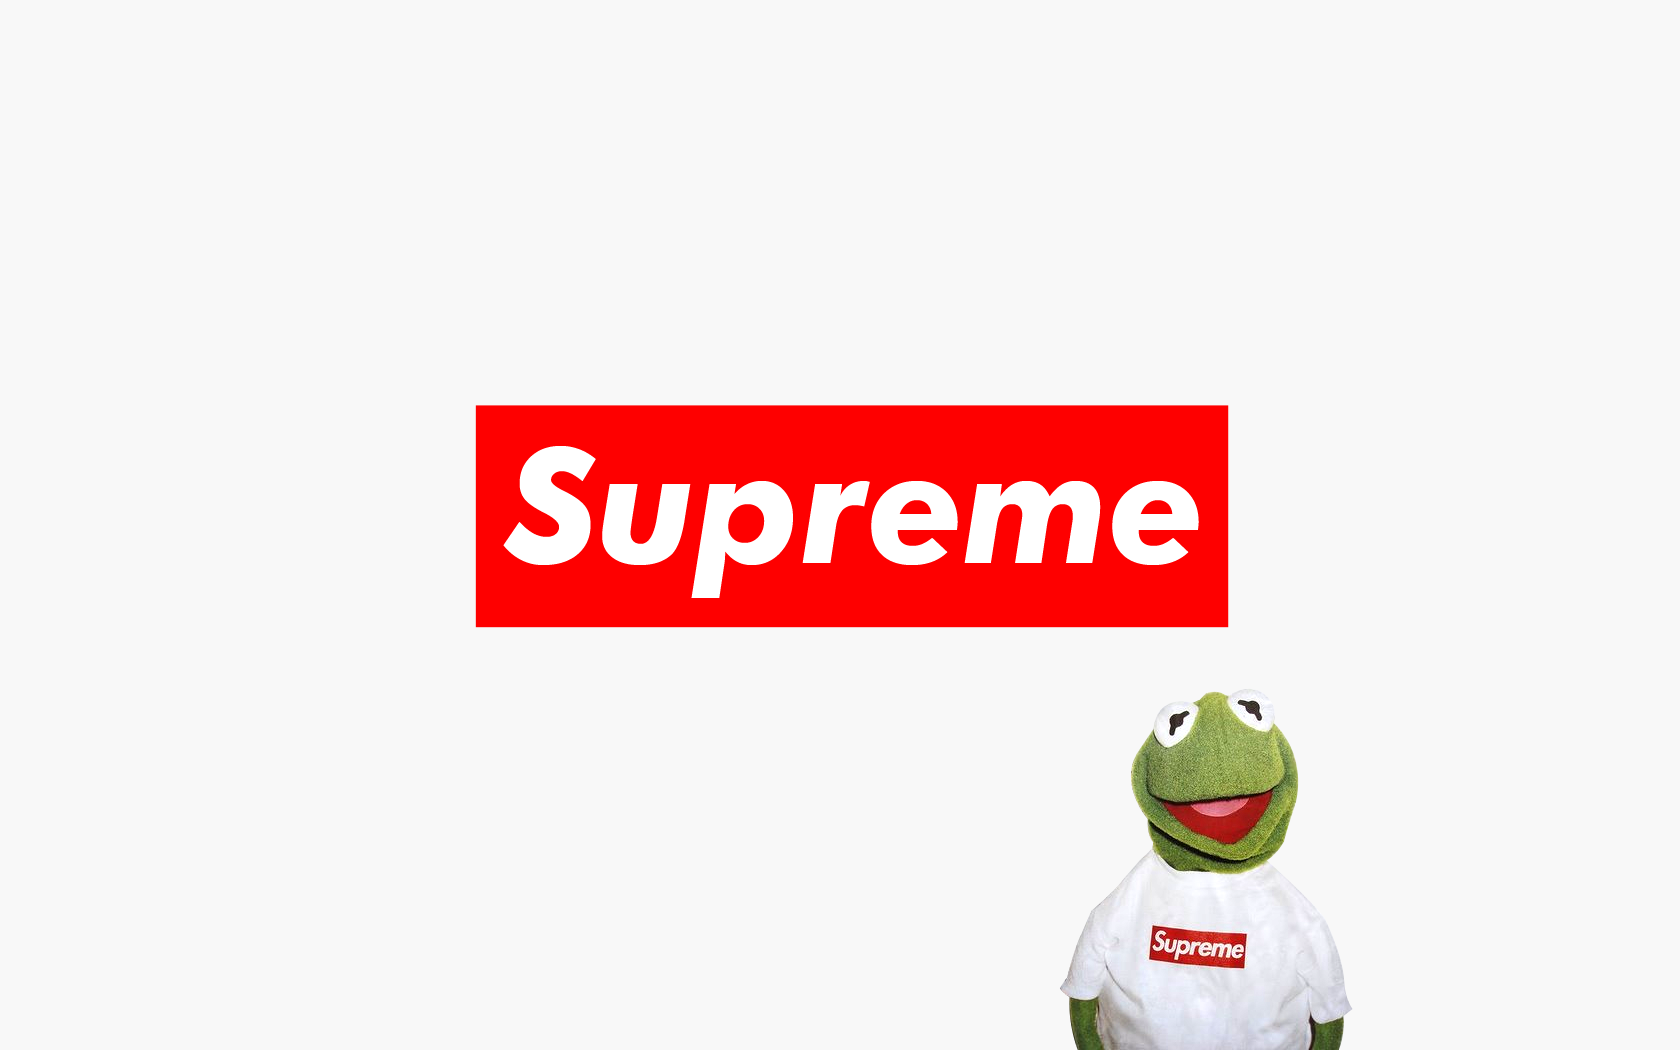 Supreme Wallpaper Images Pictures   Becuo